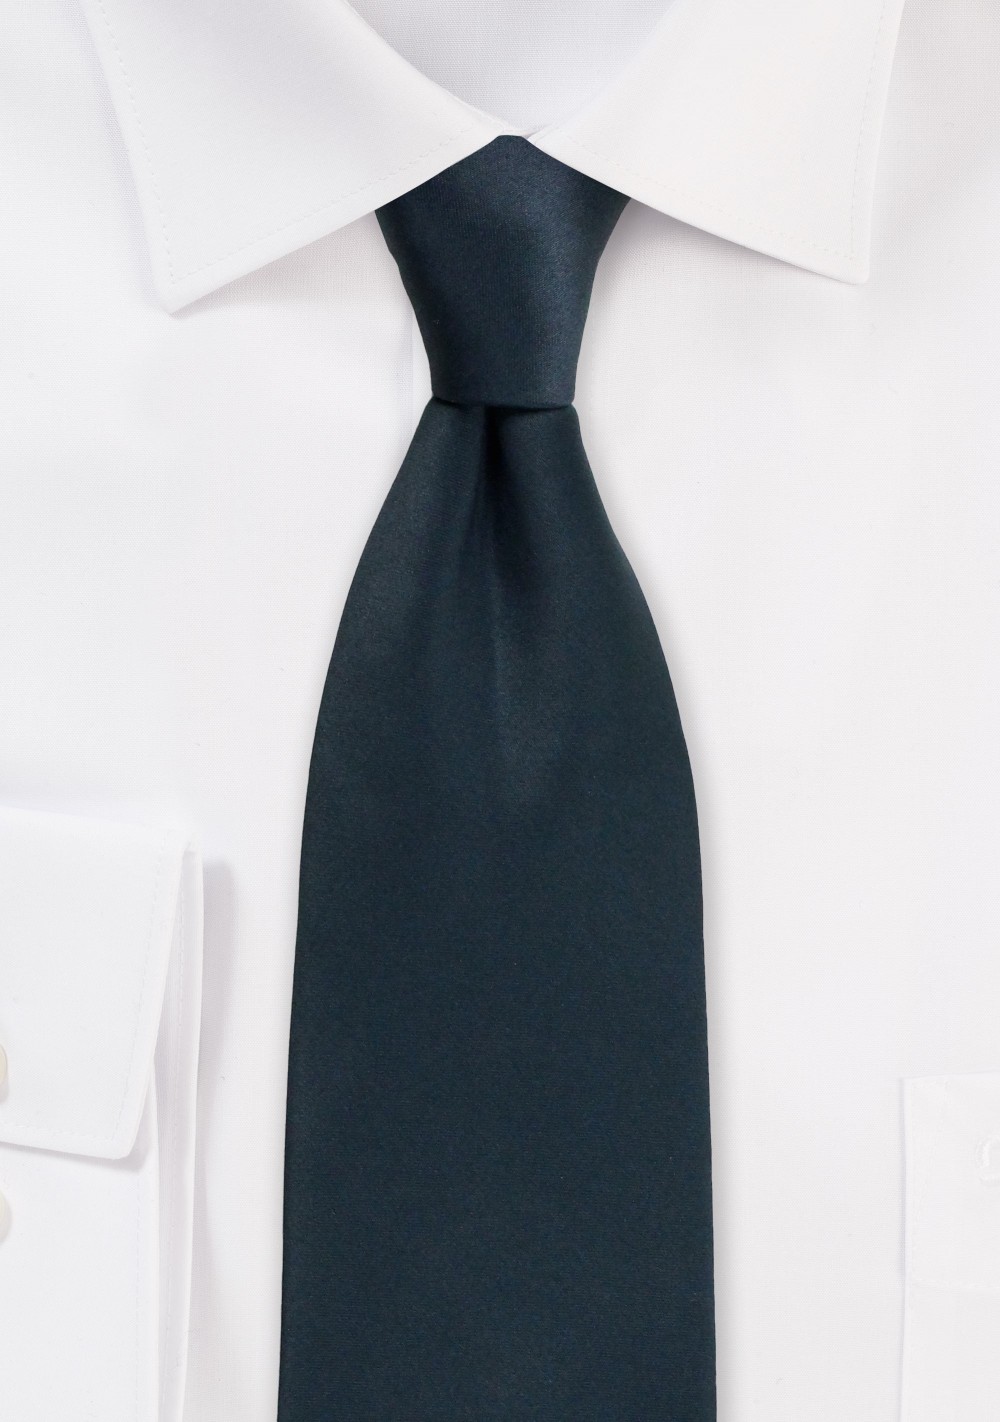 Formal Satin Tie in Charcoal